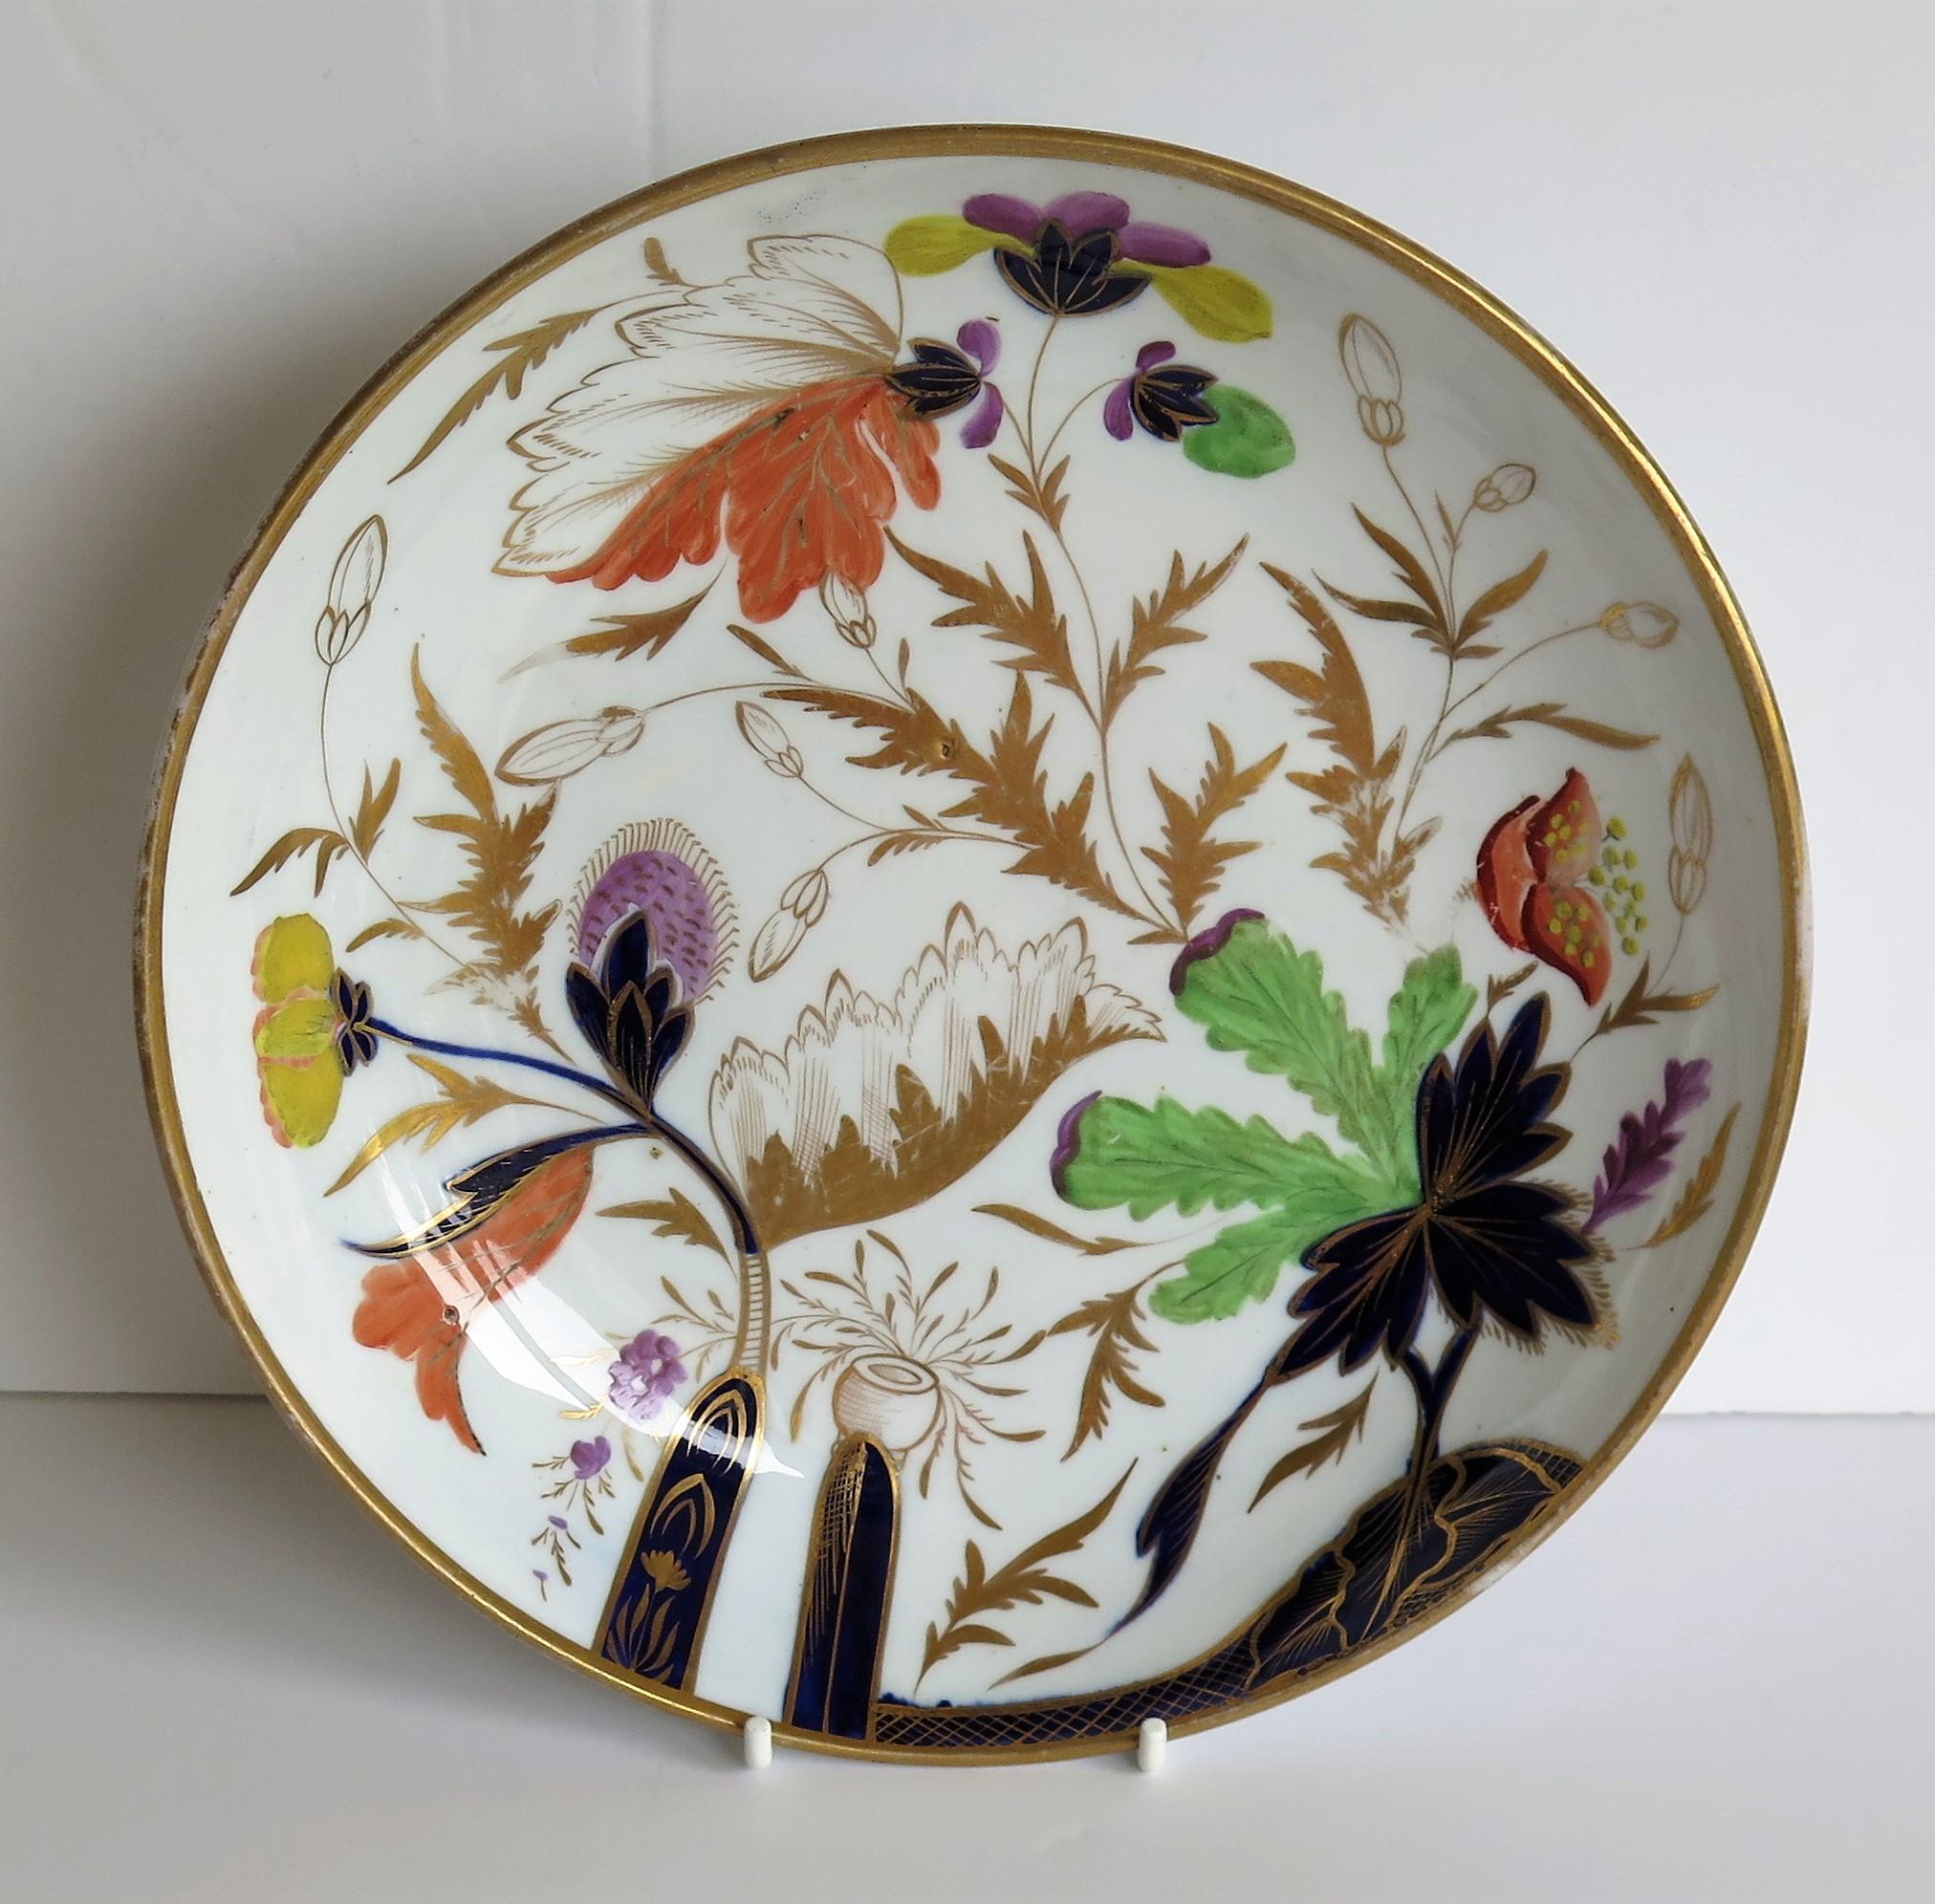 This is a porcelain, hand painted and gilded deep plate or saucer dish made by Miles Mason (Mason's), Staffordshire Potteries, England in the very early years of the 18th century, George III period, circa 1805-1808.

The dish is well potted on a